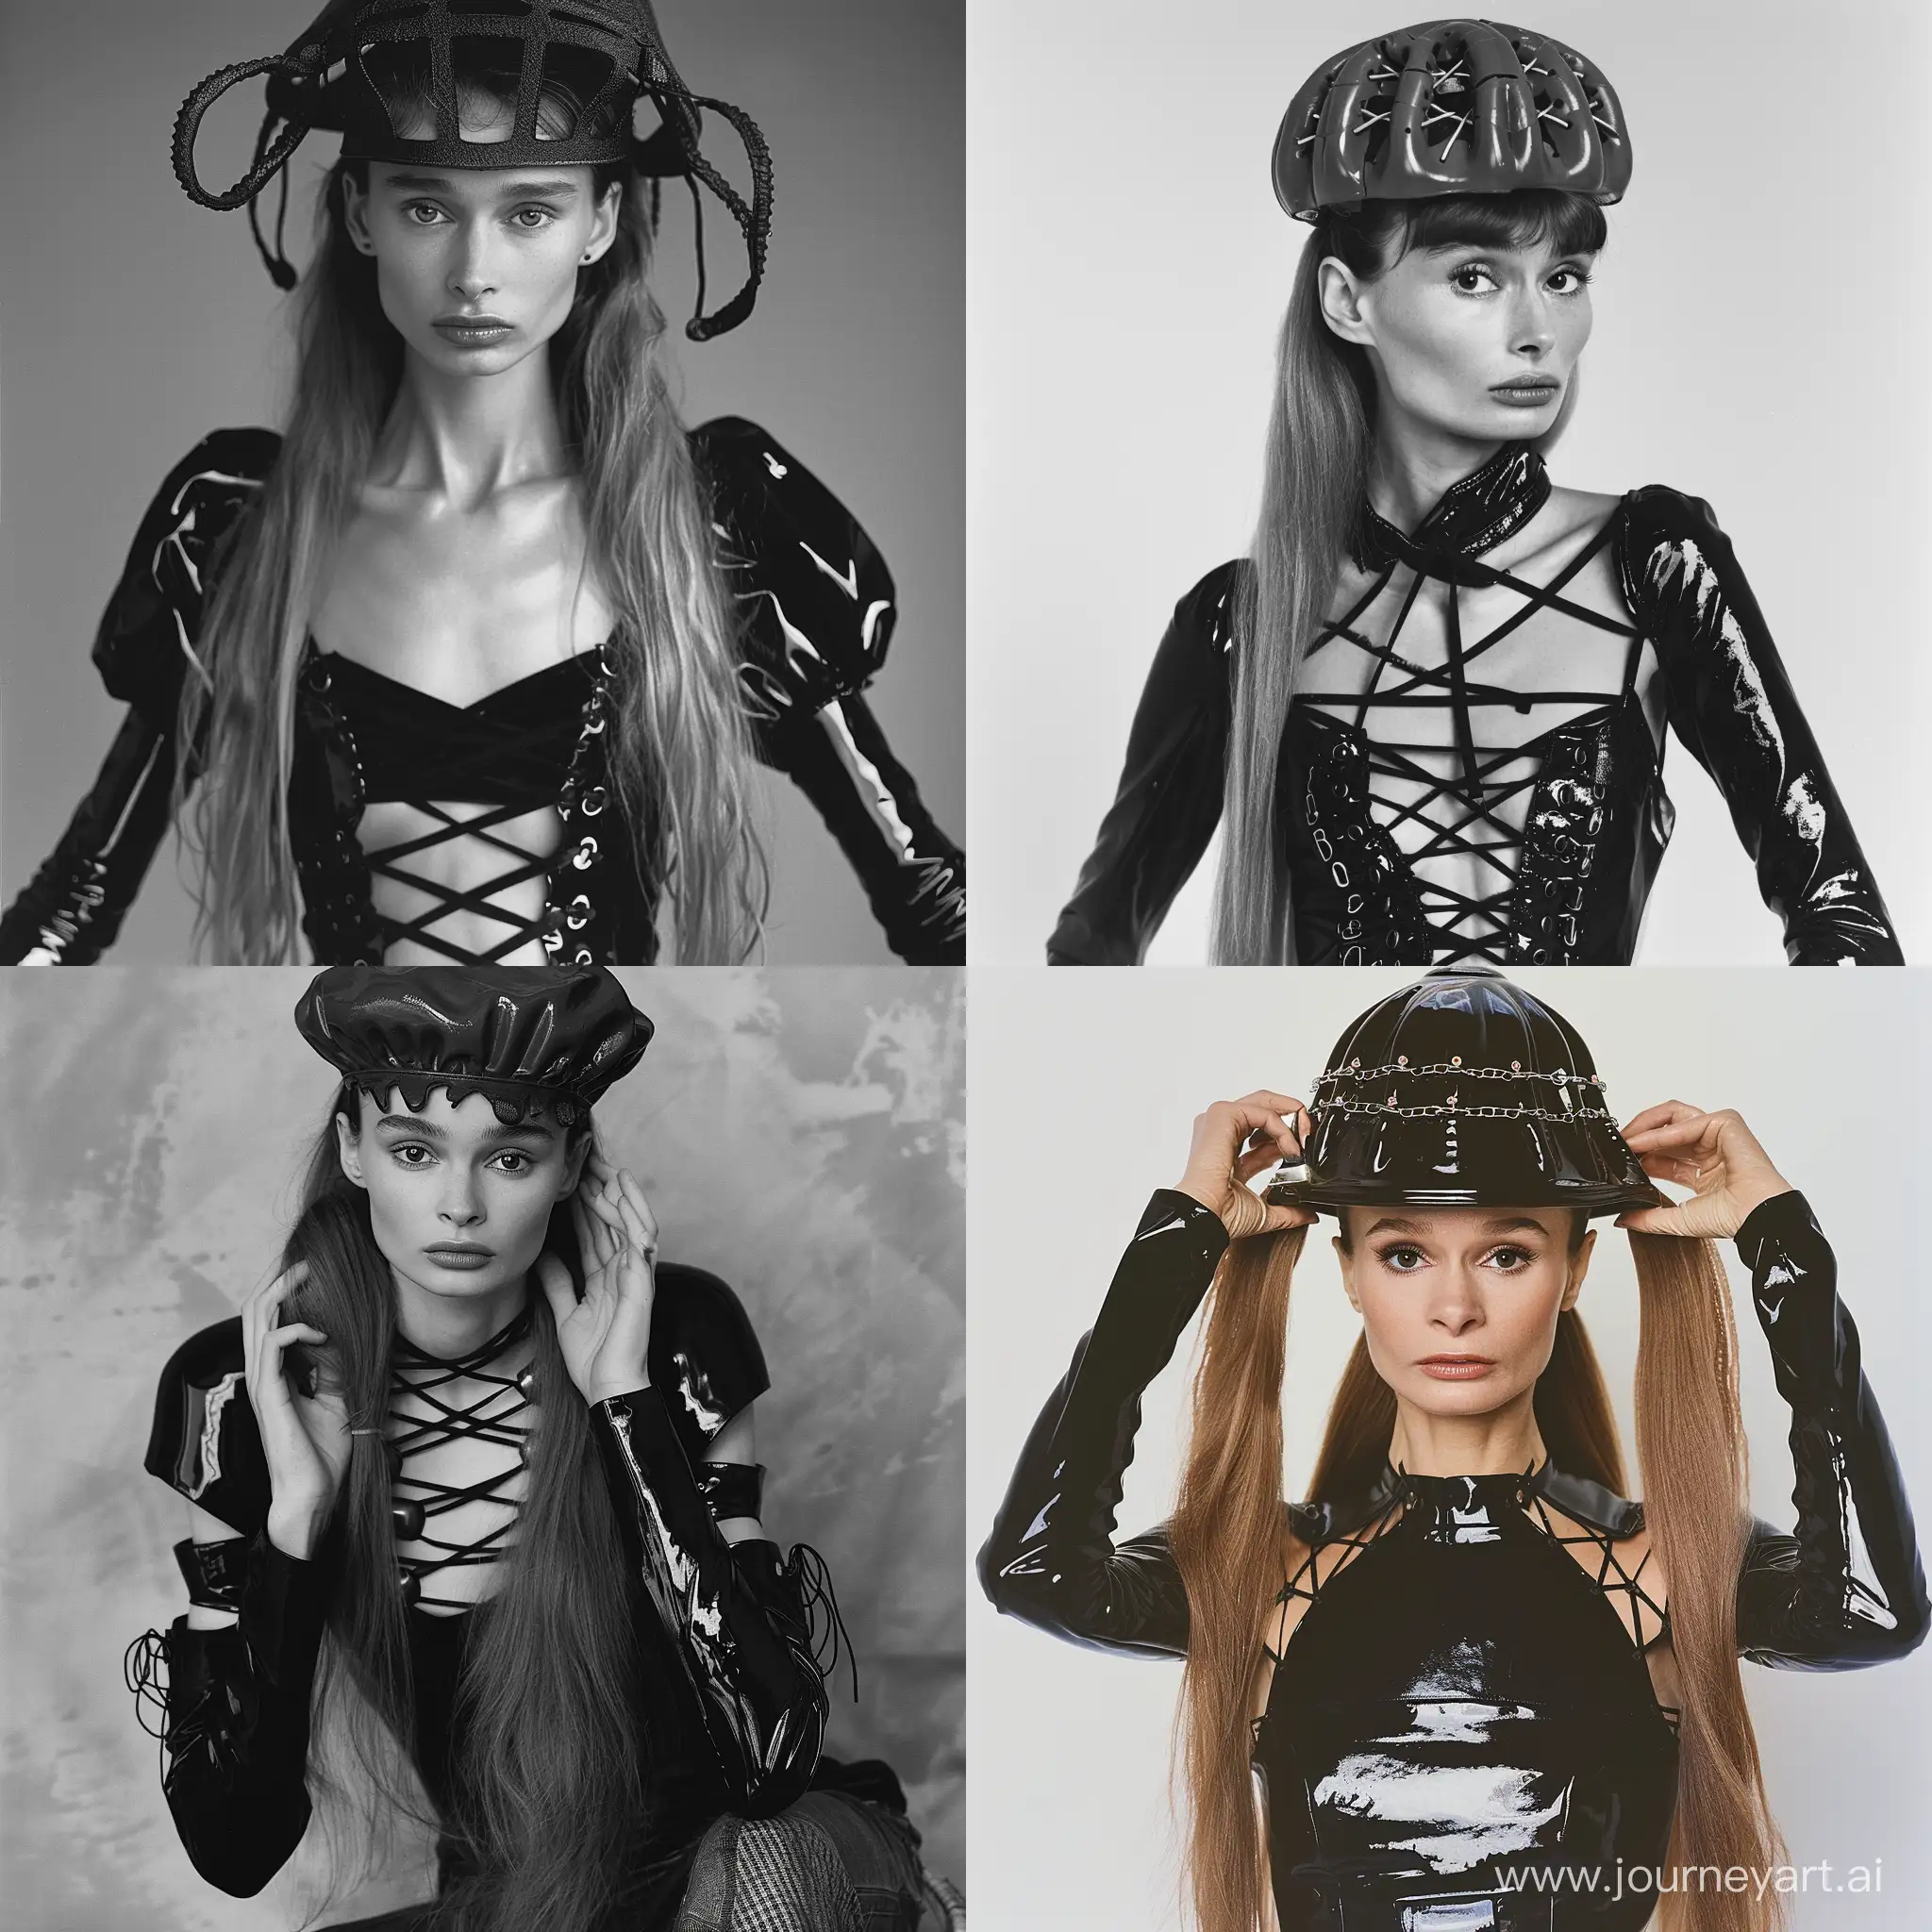 Audrey-Hepburn-Portraying-Madonna-with-90s-Aesthetic-in-Vogue-Photoshoot